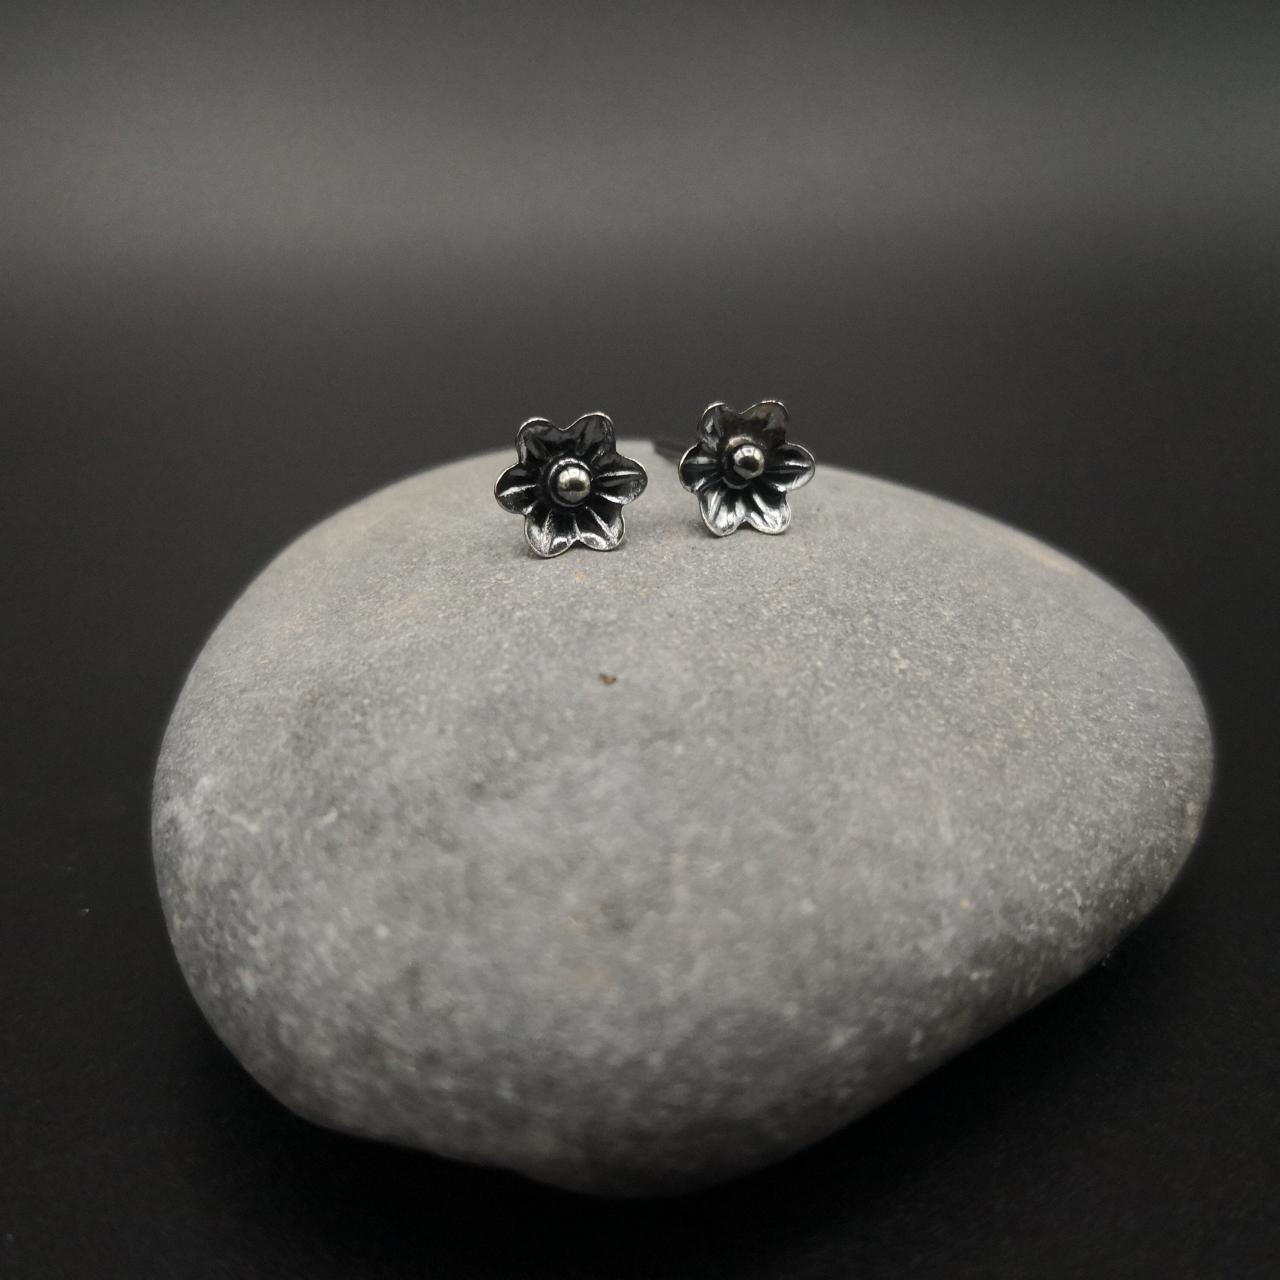 Dainty Flower Studs Bespoke Sterling Silver Minimalist Small Flower Posts Rustic Delicate Handmade Jewelry Gift Ideas Floral Jewelry Tiny